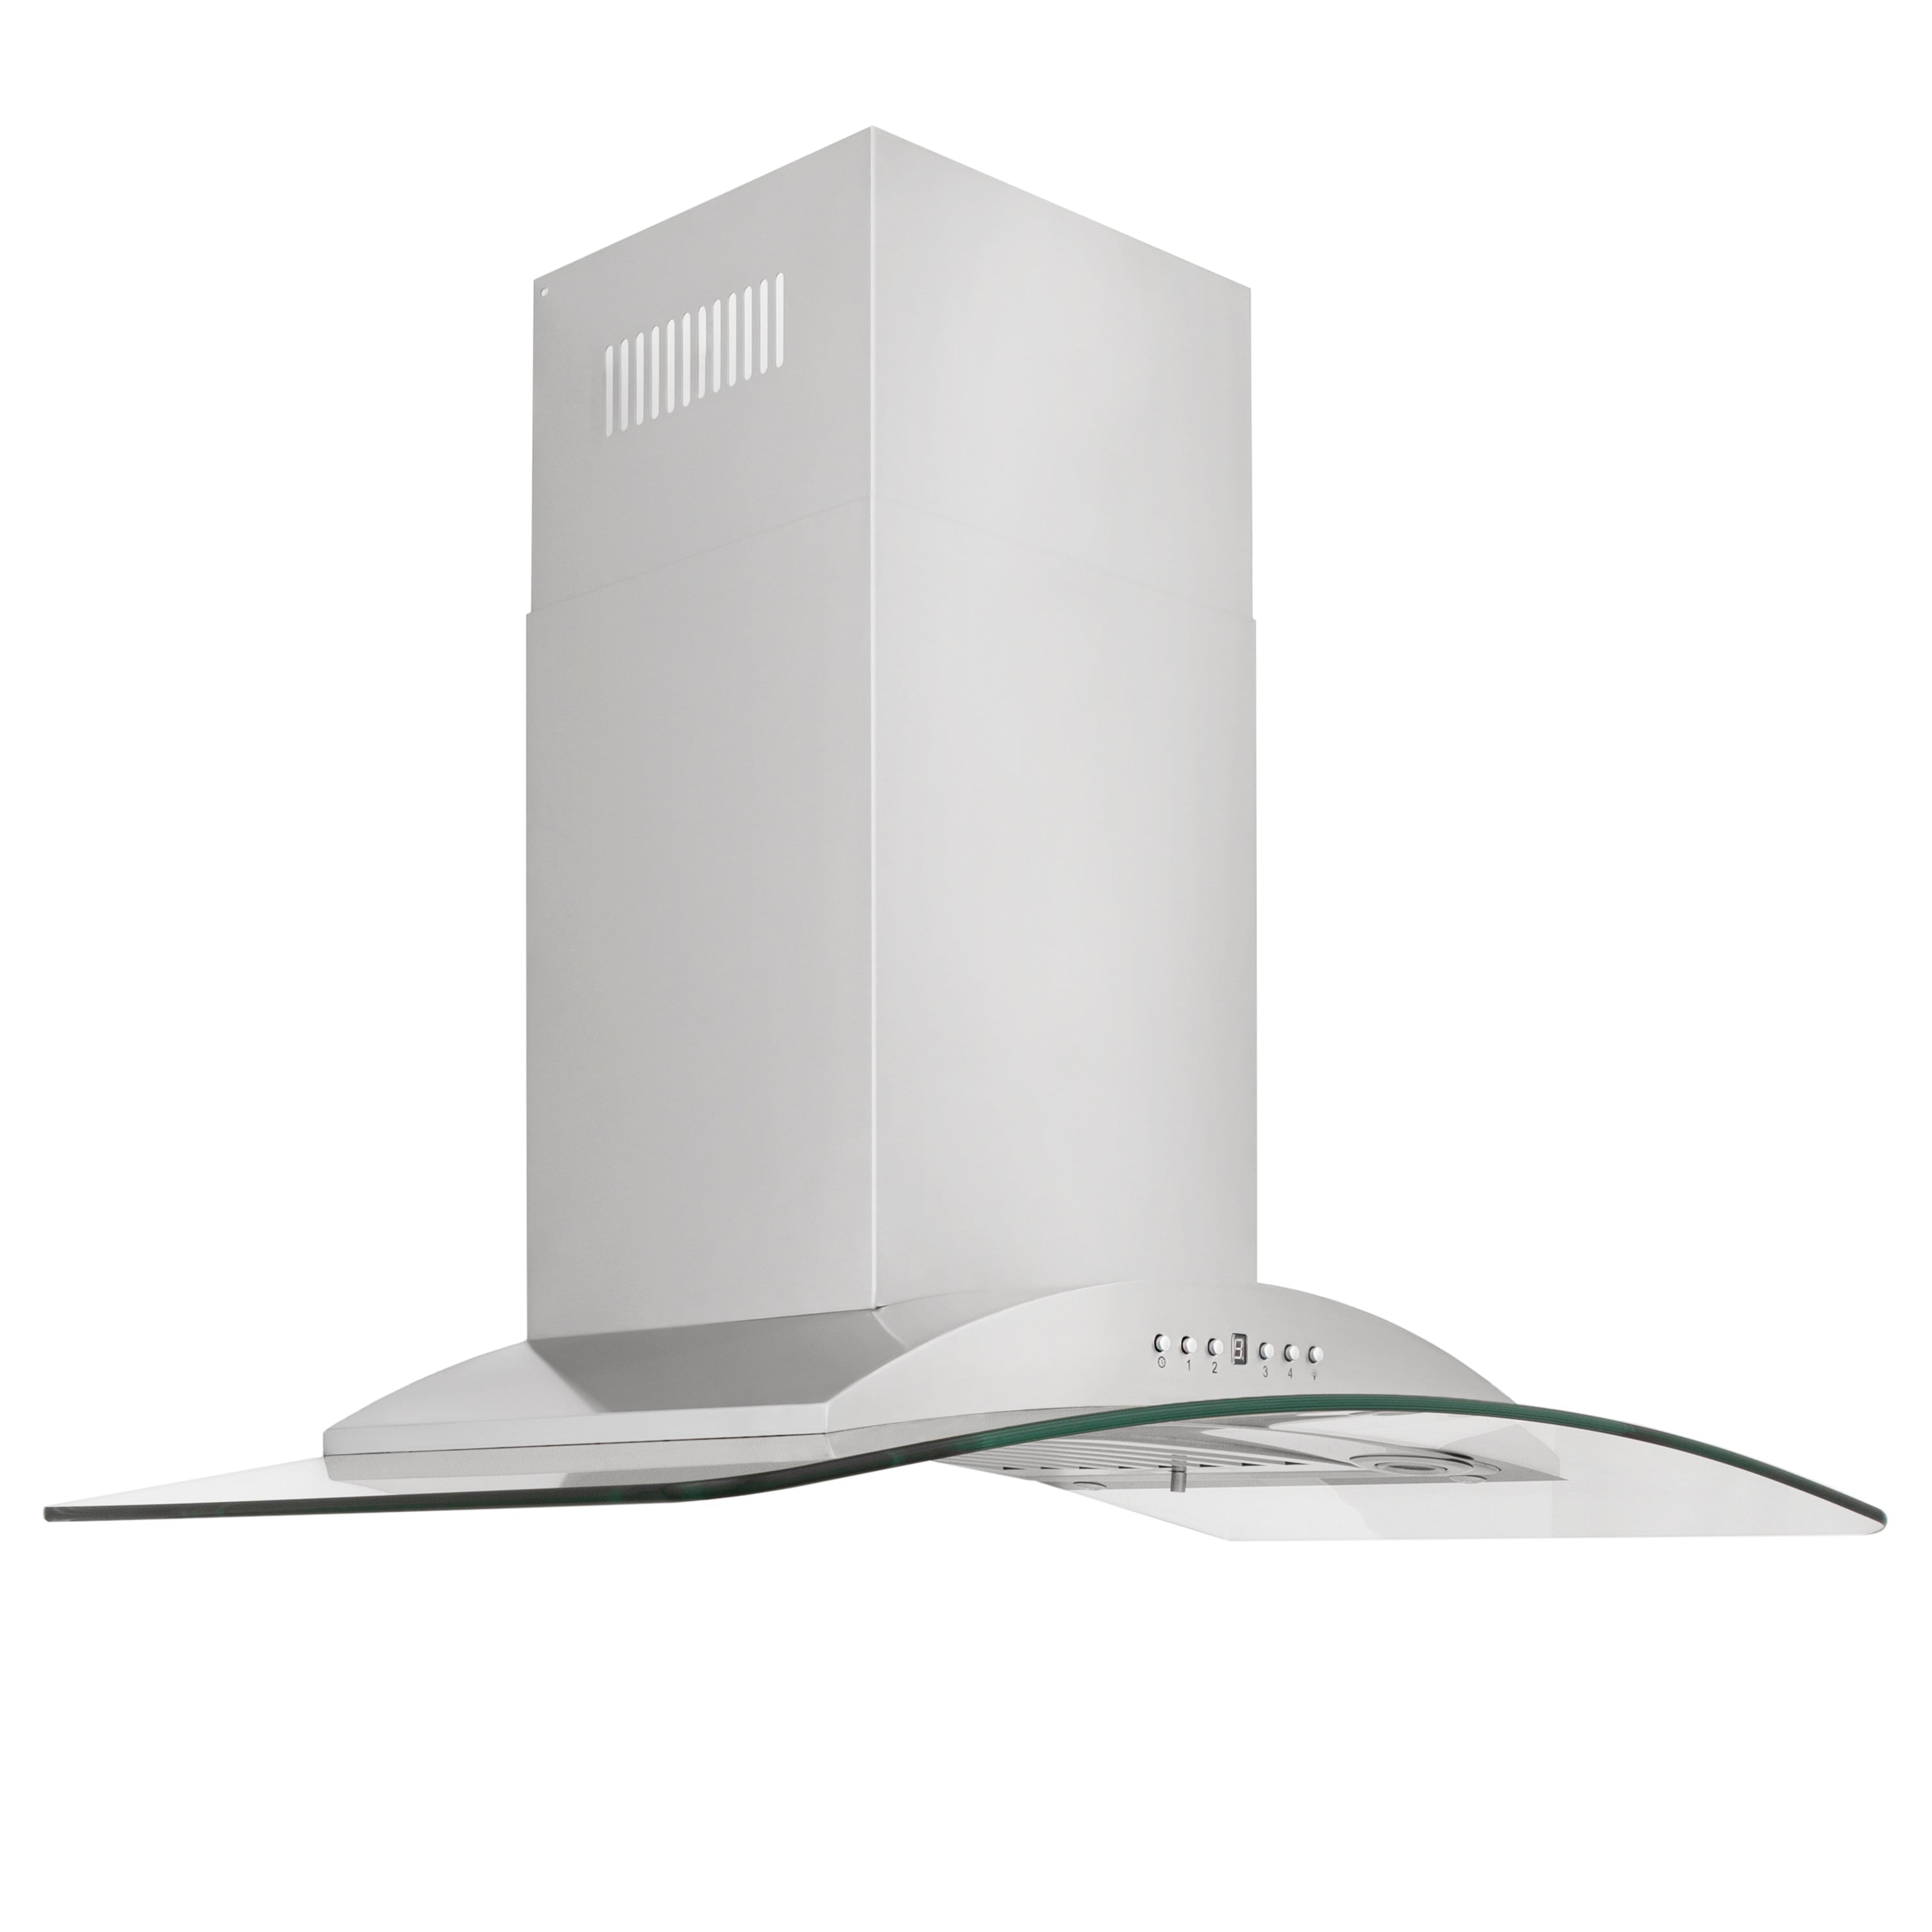 ZLINE 36" Convertible Vent Wall Mount Range Hood in Stainless Steel & Glass (KN-36)